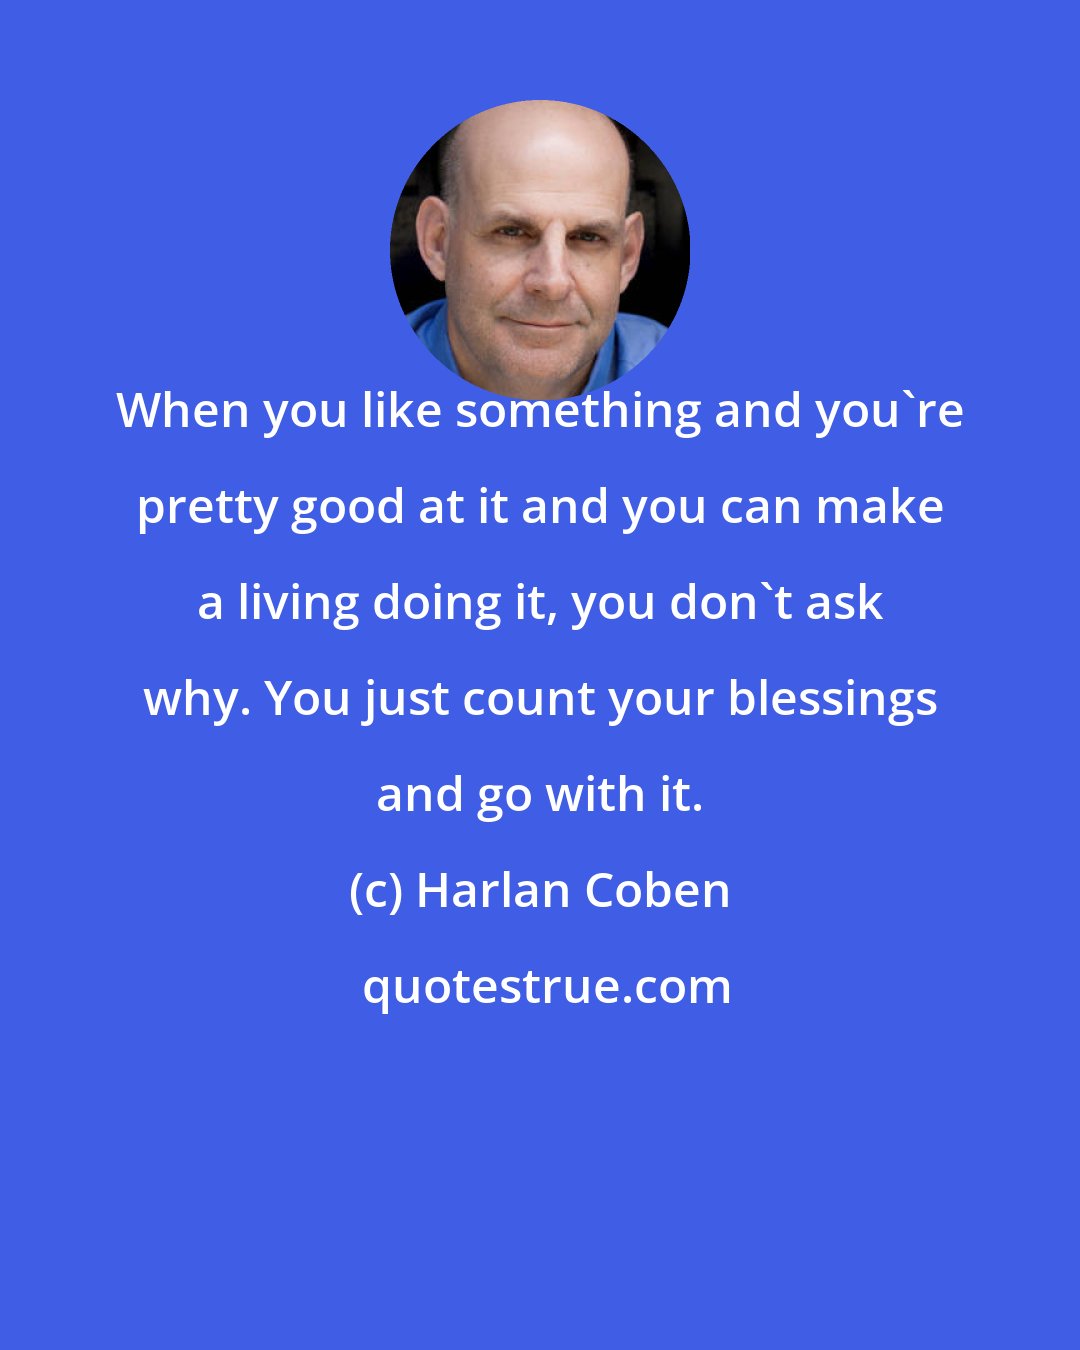 Harlan Coben: When you like something and you're pretty good at it and you can make a living doing it, you don't ask why. You just count your blessings and go with it.